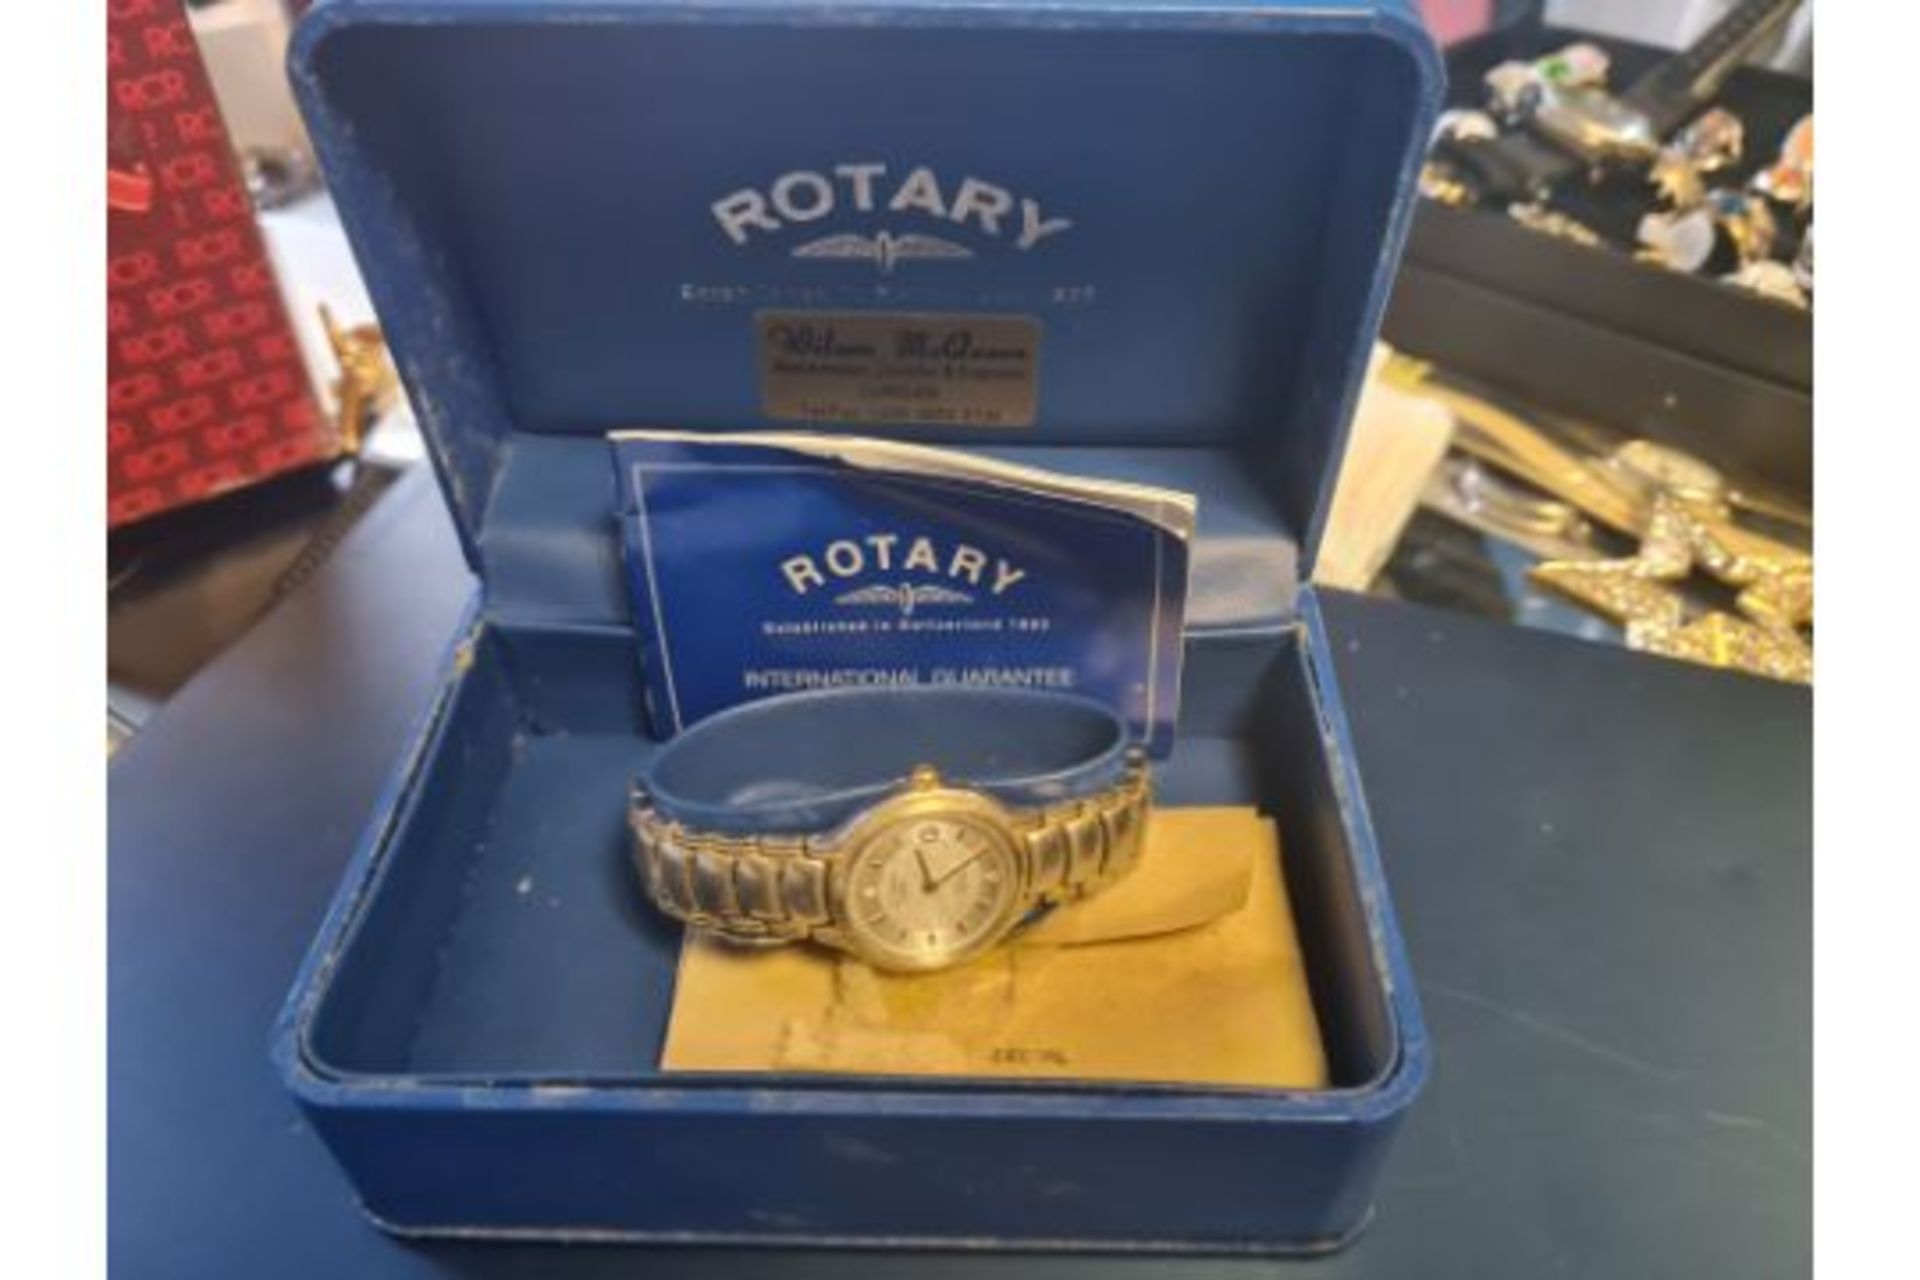 Vintage Rotary Watch with box